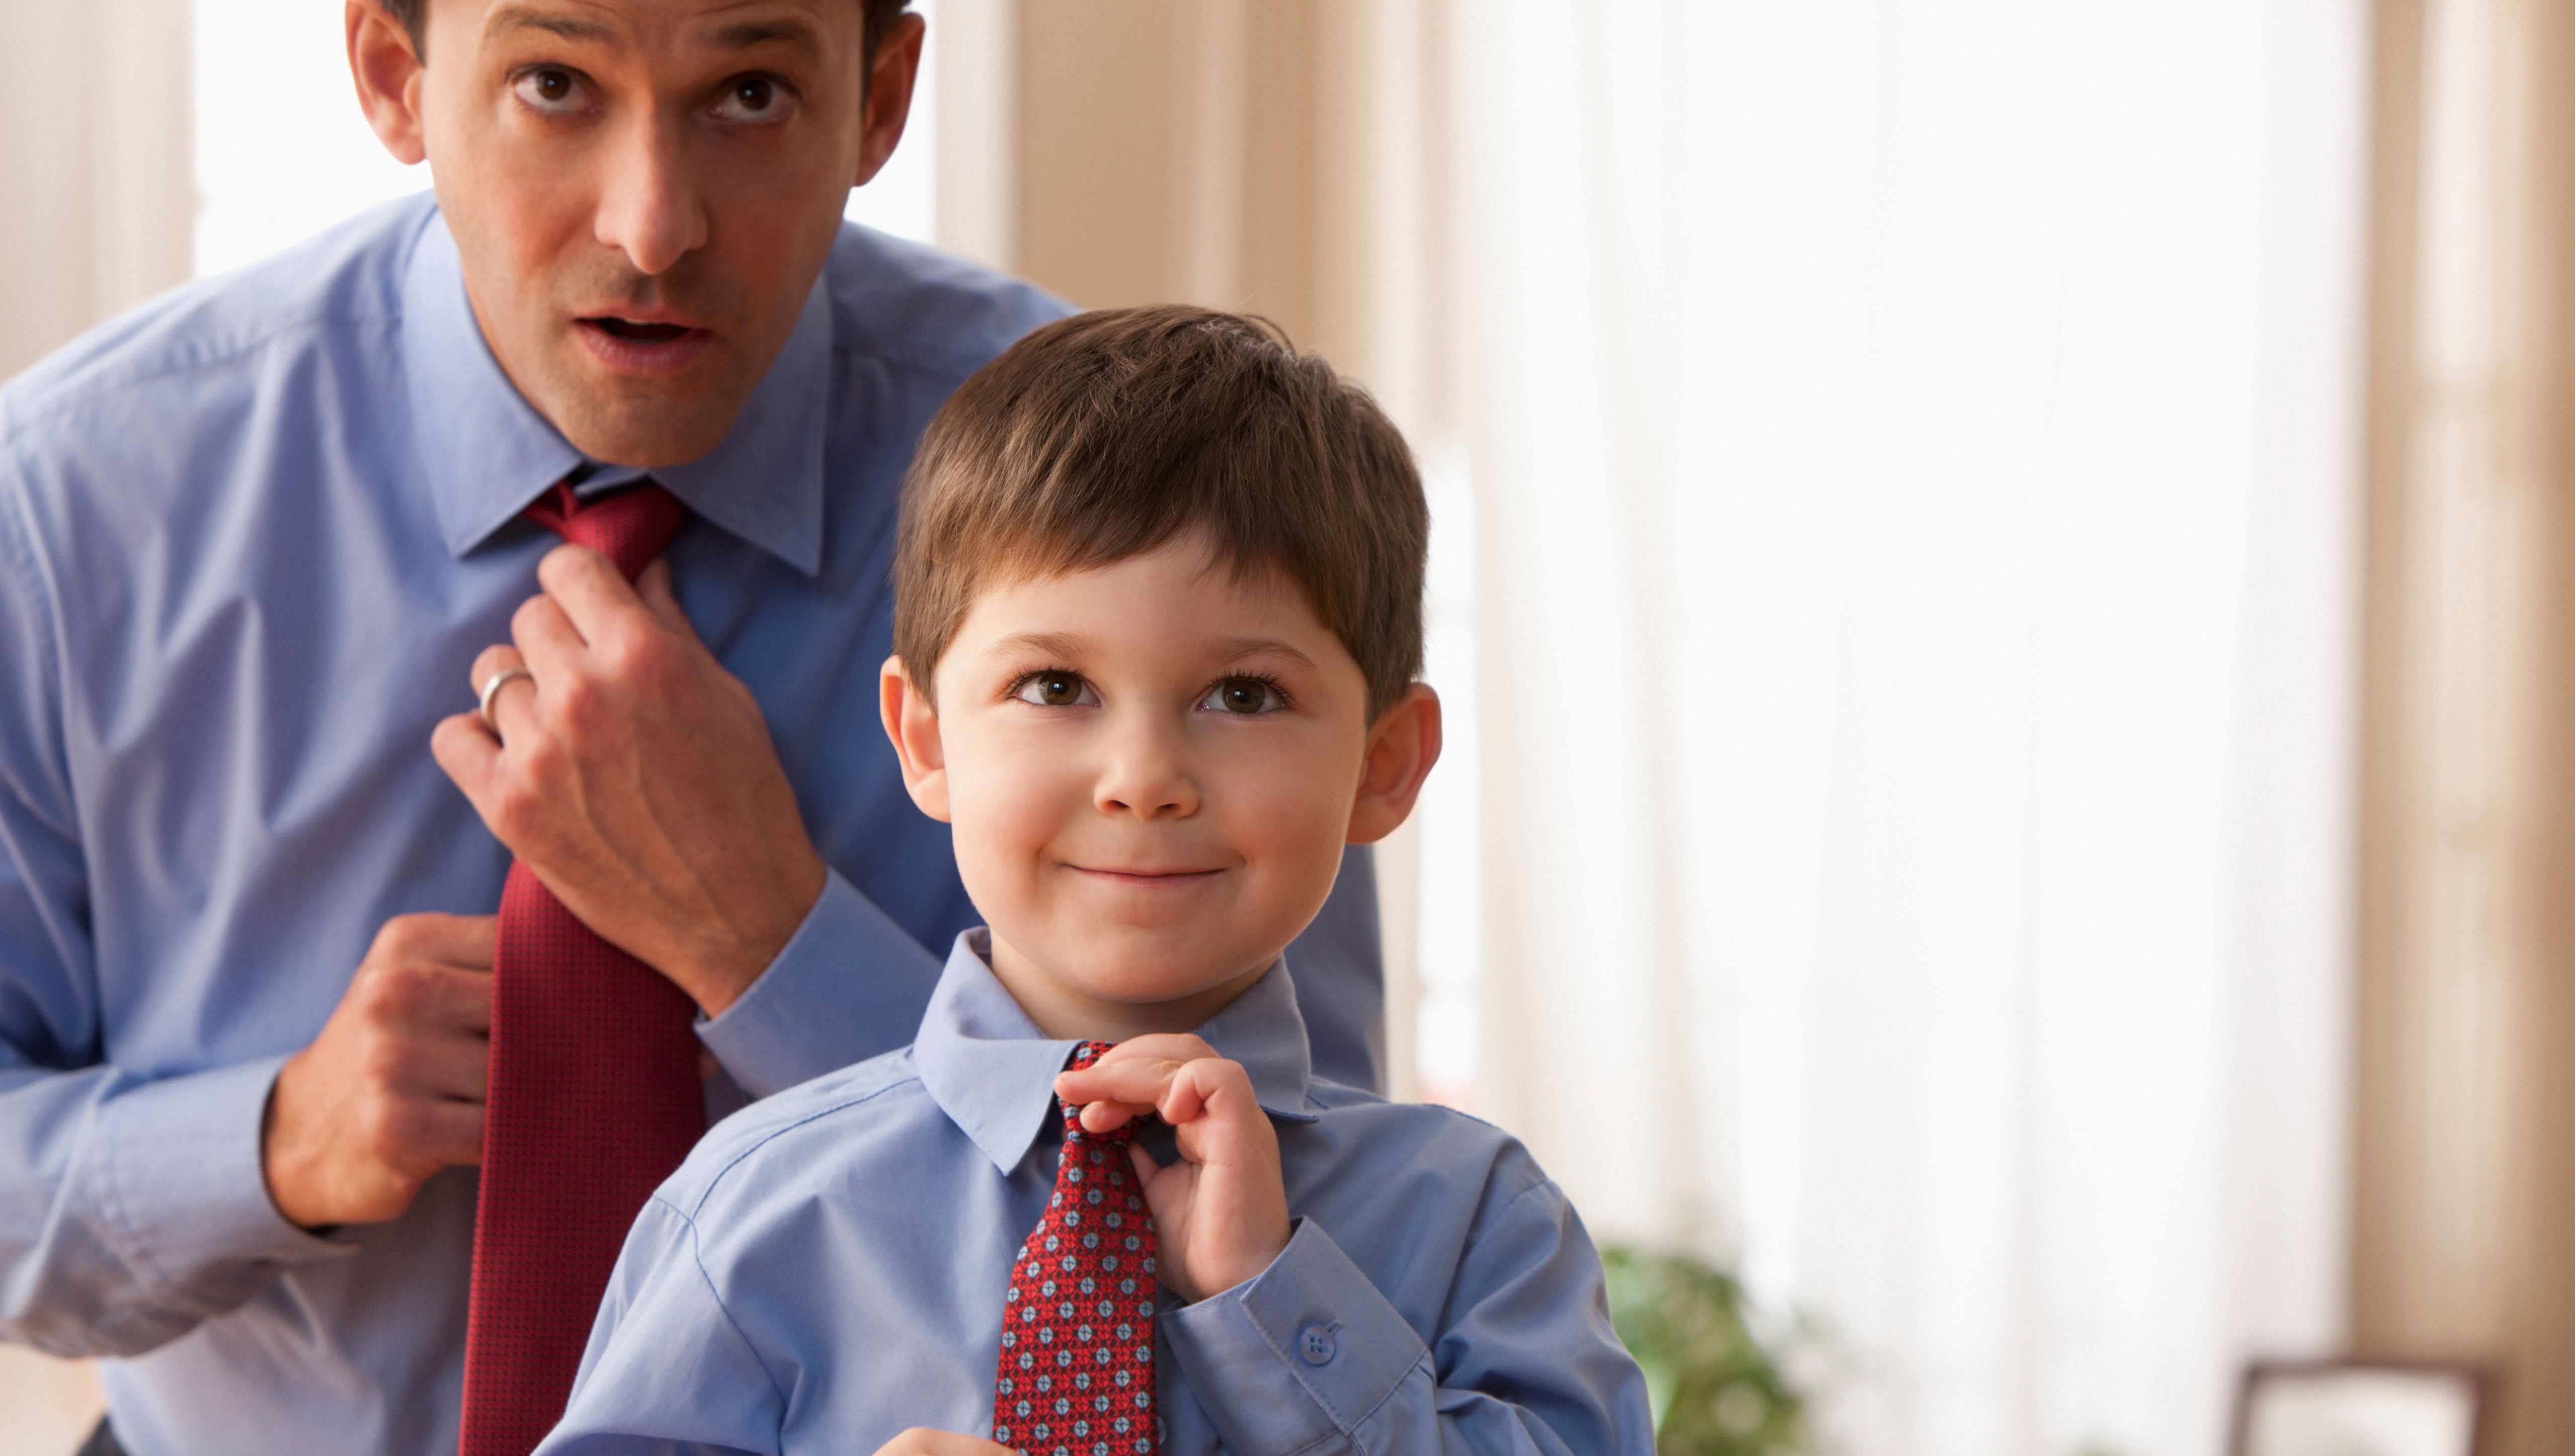 Man and his boy putting on neckties together